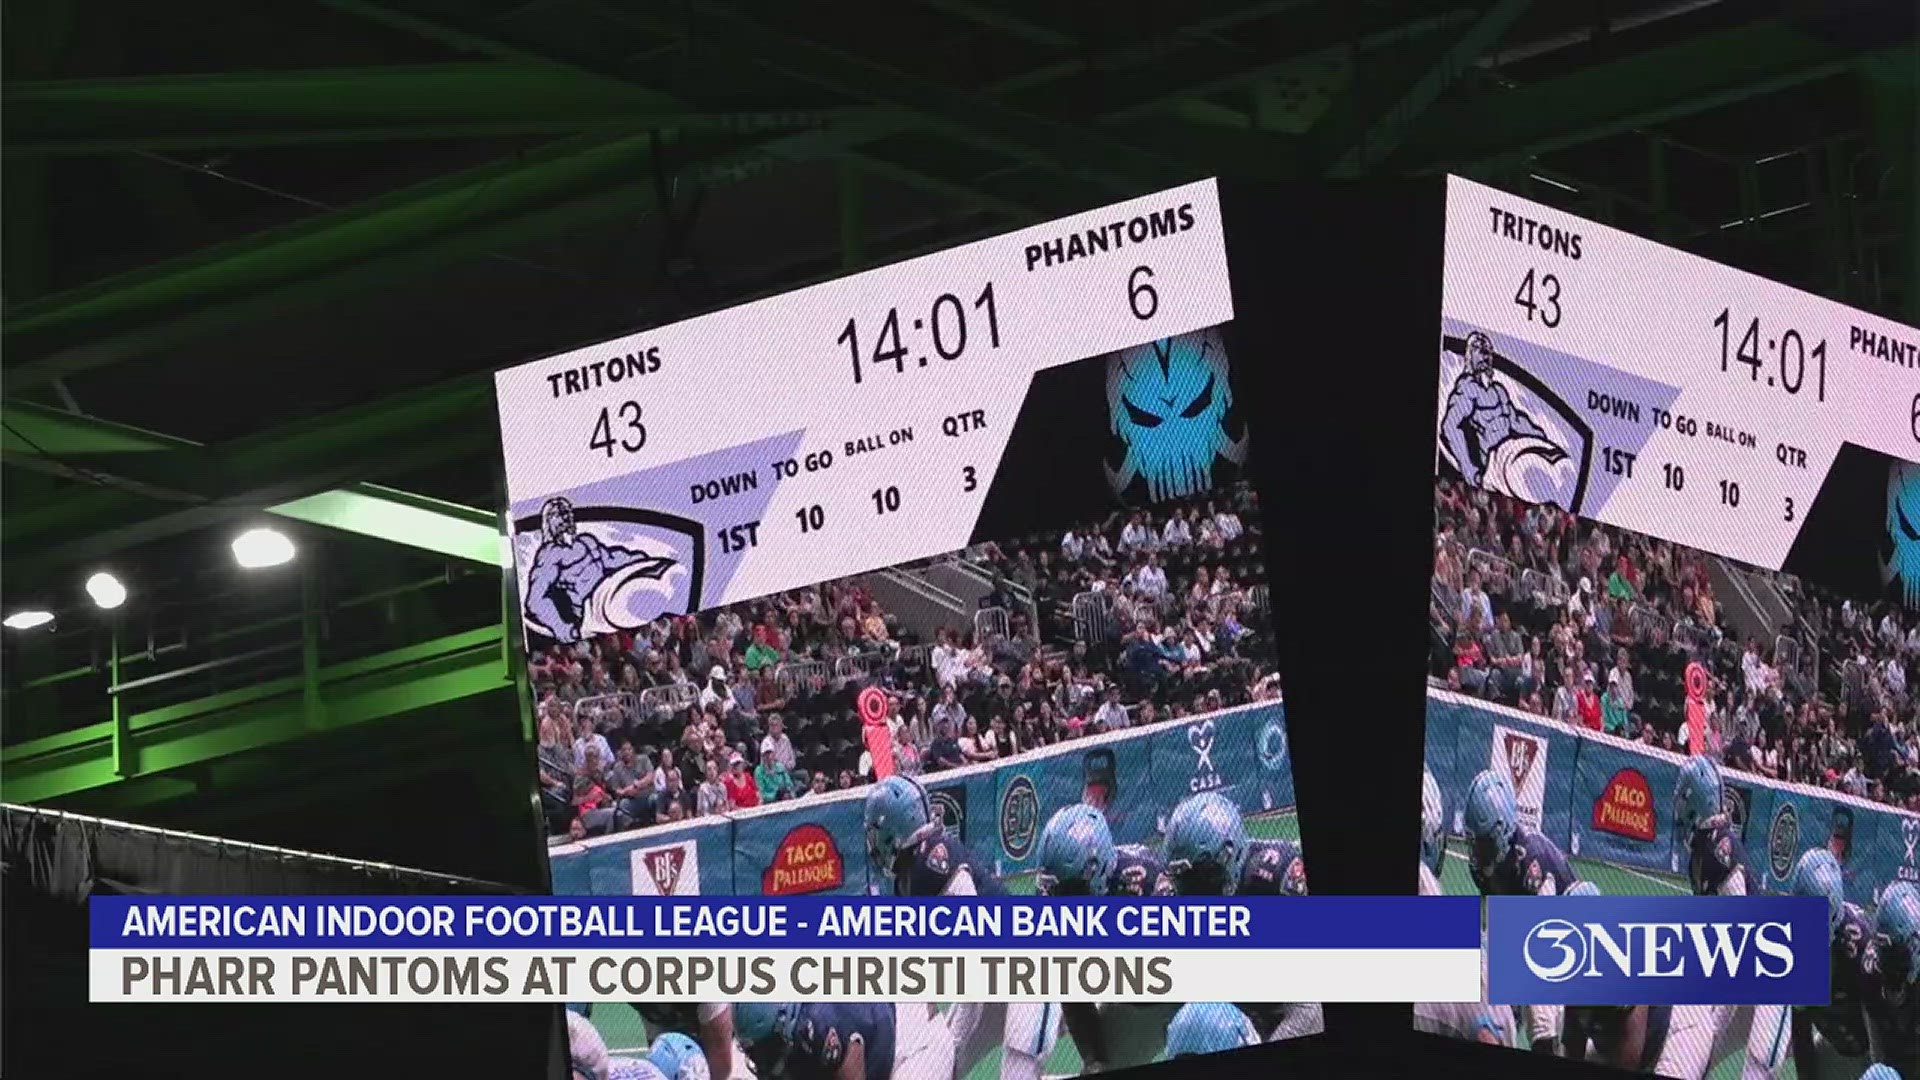 The Tritons defeated the Pharr Phantoms, 76-6, on Friday at the American Bank Center.